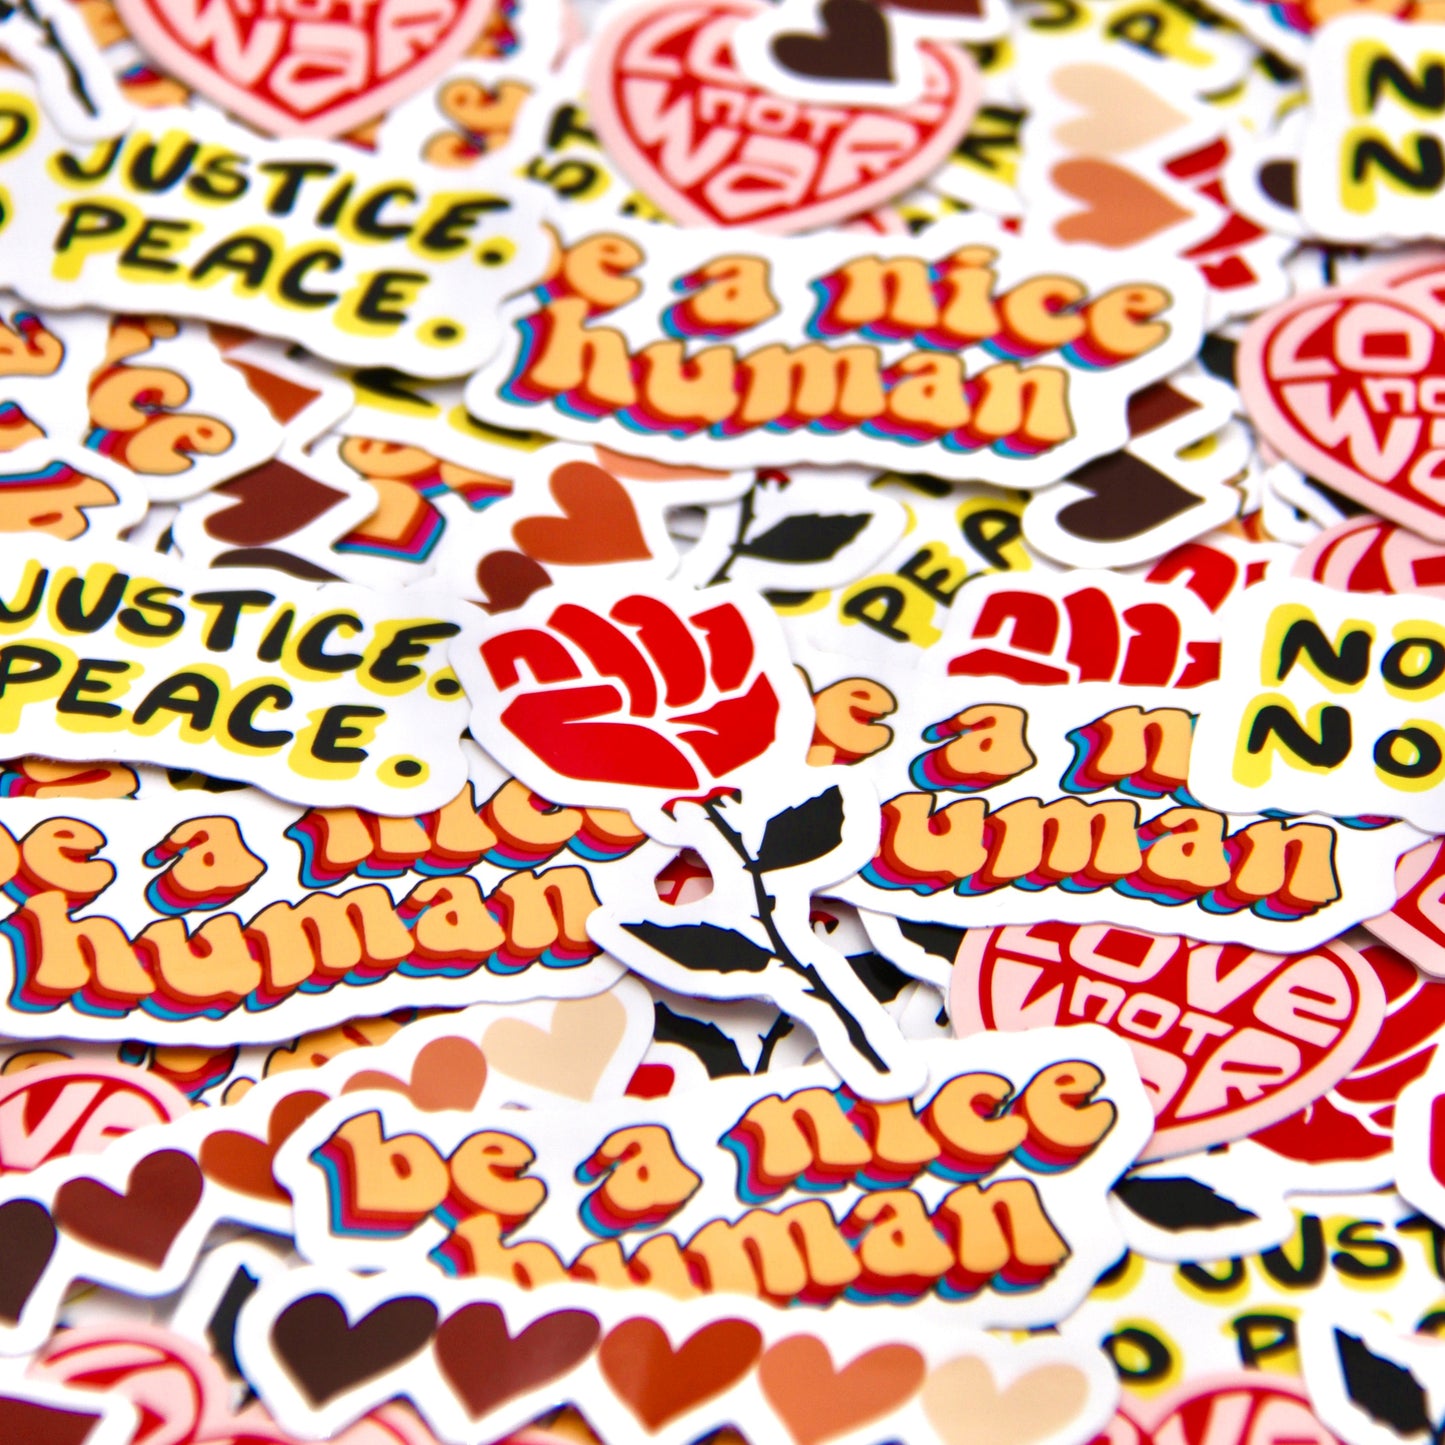 LARGE STICKER PACK with 10 full color shaped vinyl stickers with